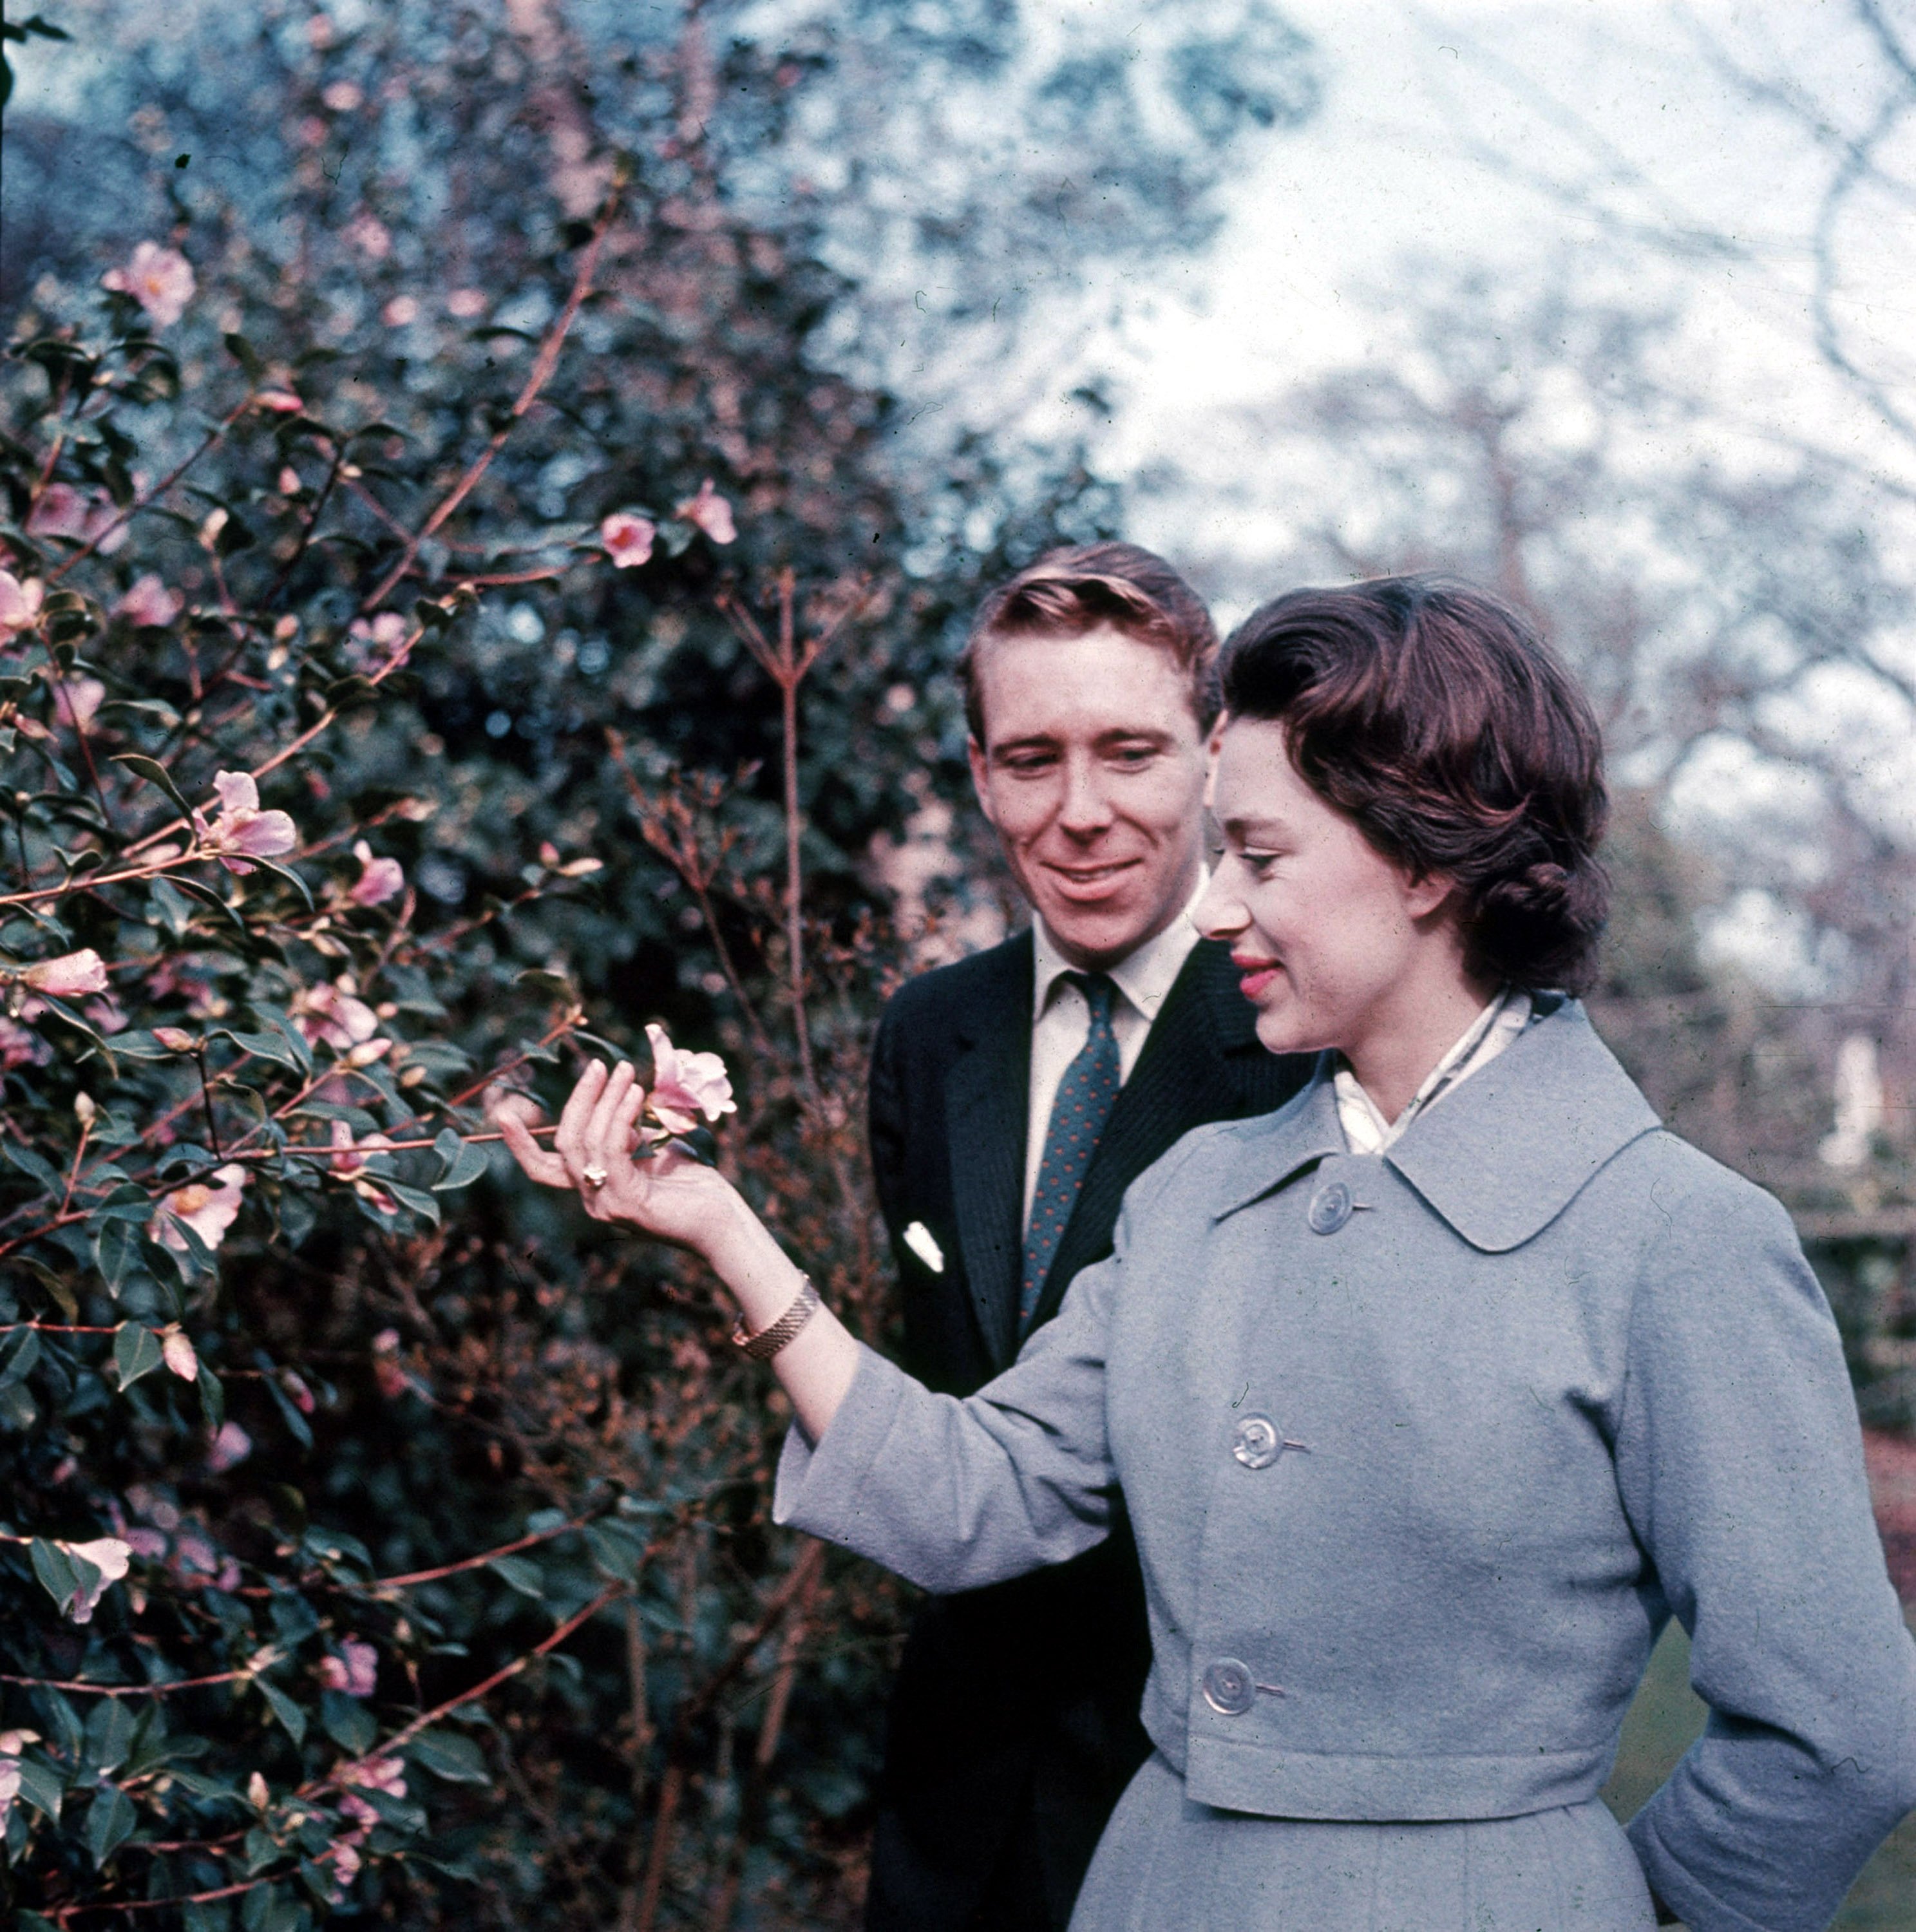 Princess Margaret & Antony Armstrong-Jones in the grounds of Royal Lodge after announcing their engagement on Feb. 27, 1960 | Photo: Getty Images